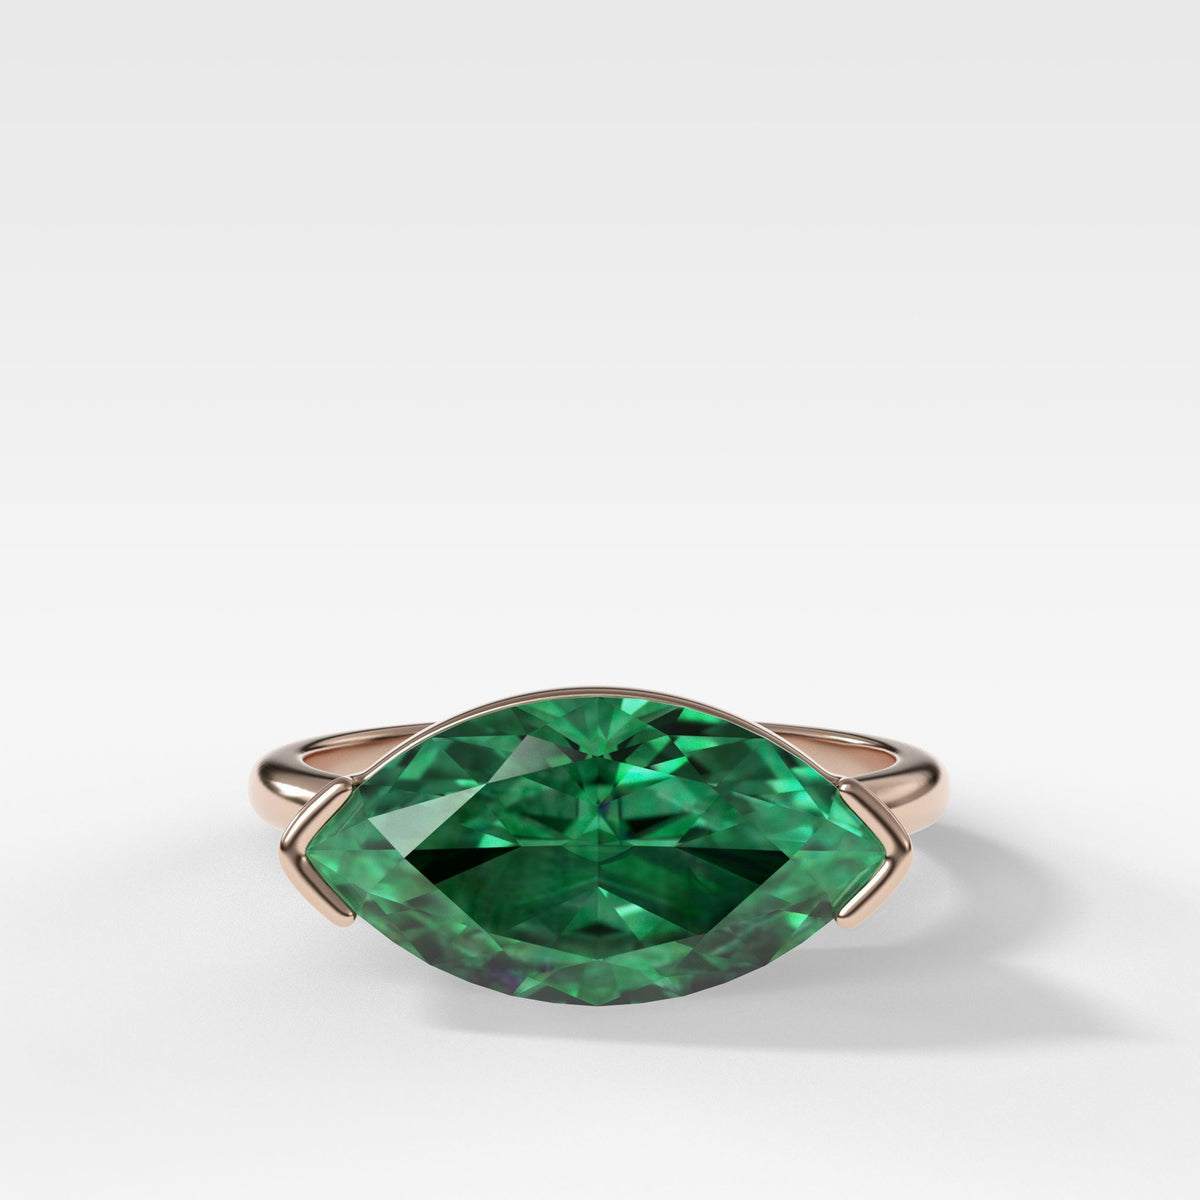 East West Half Bezel Solitaire Engagement Ring With Green Emerald Marquise Cut by Good Stone in Rose Gold